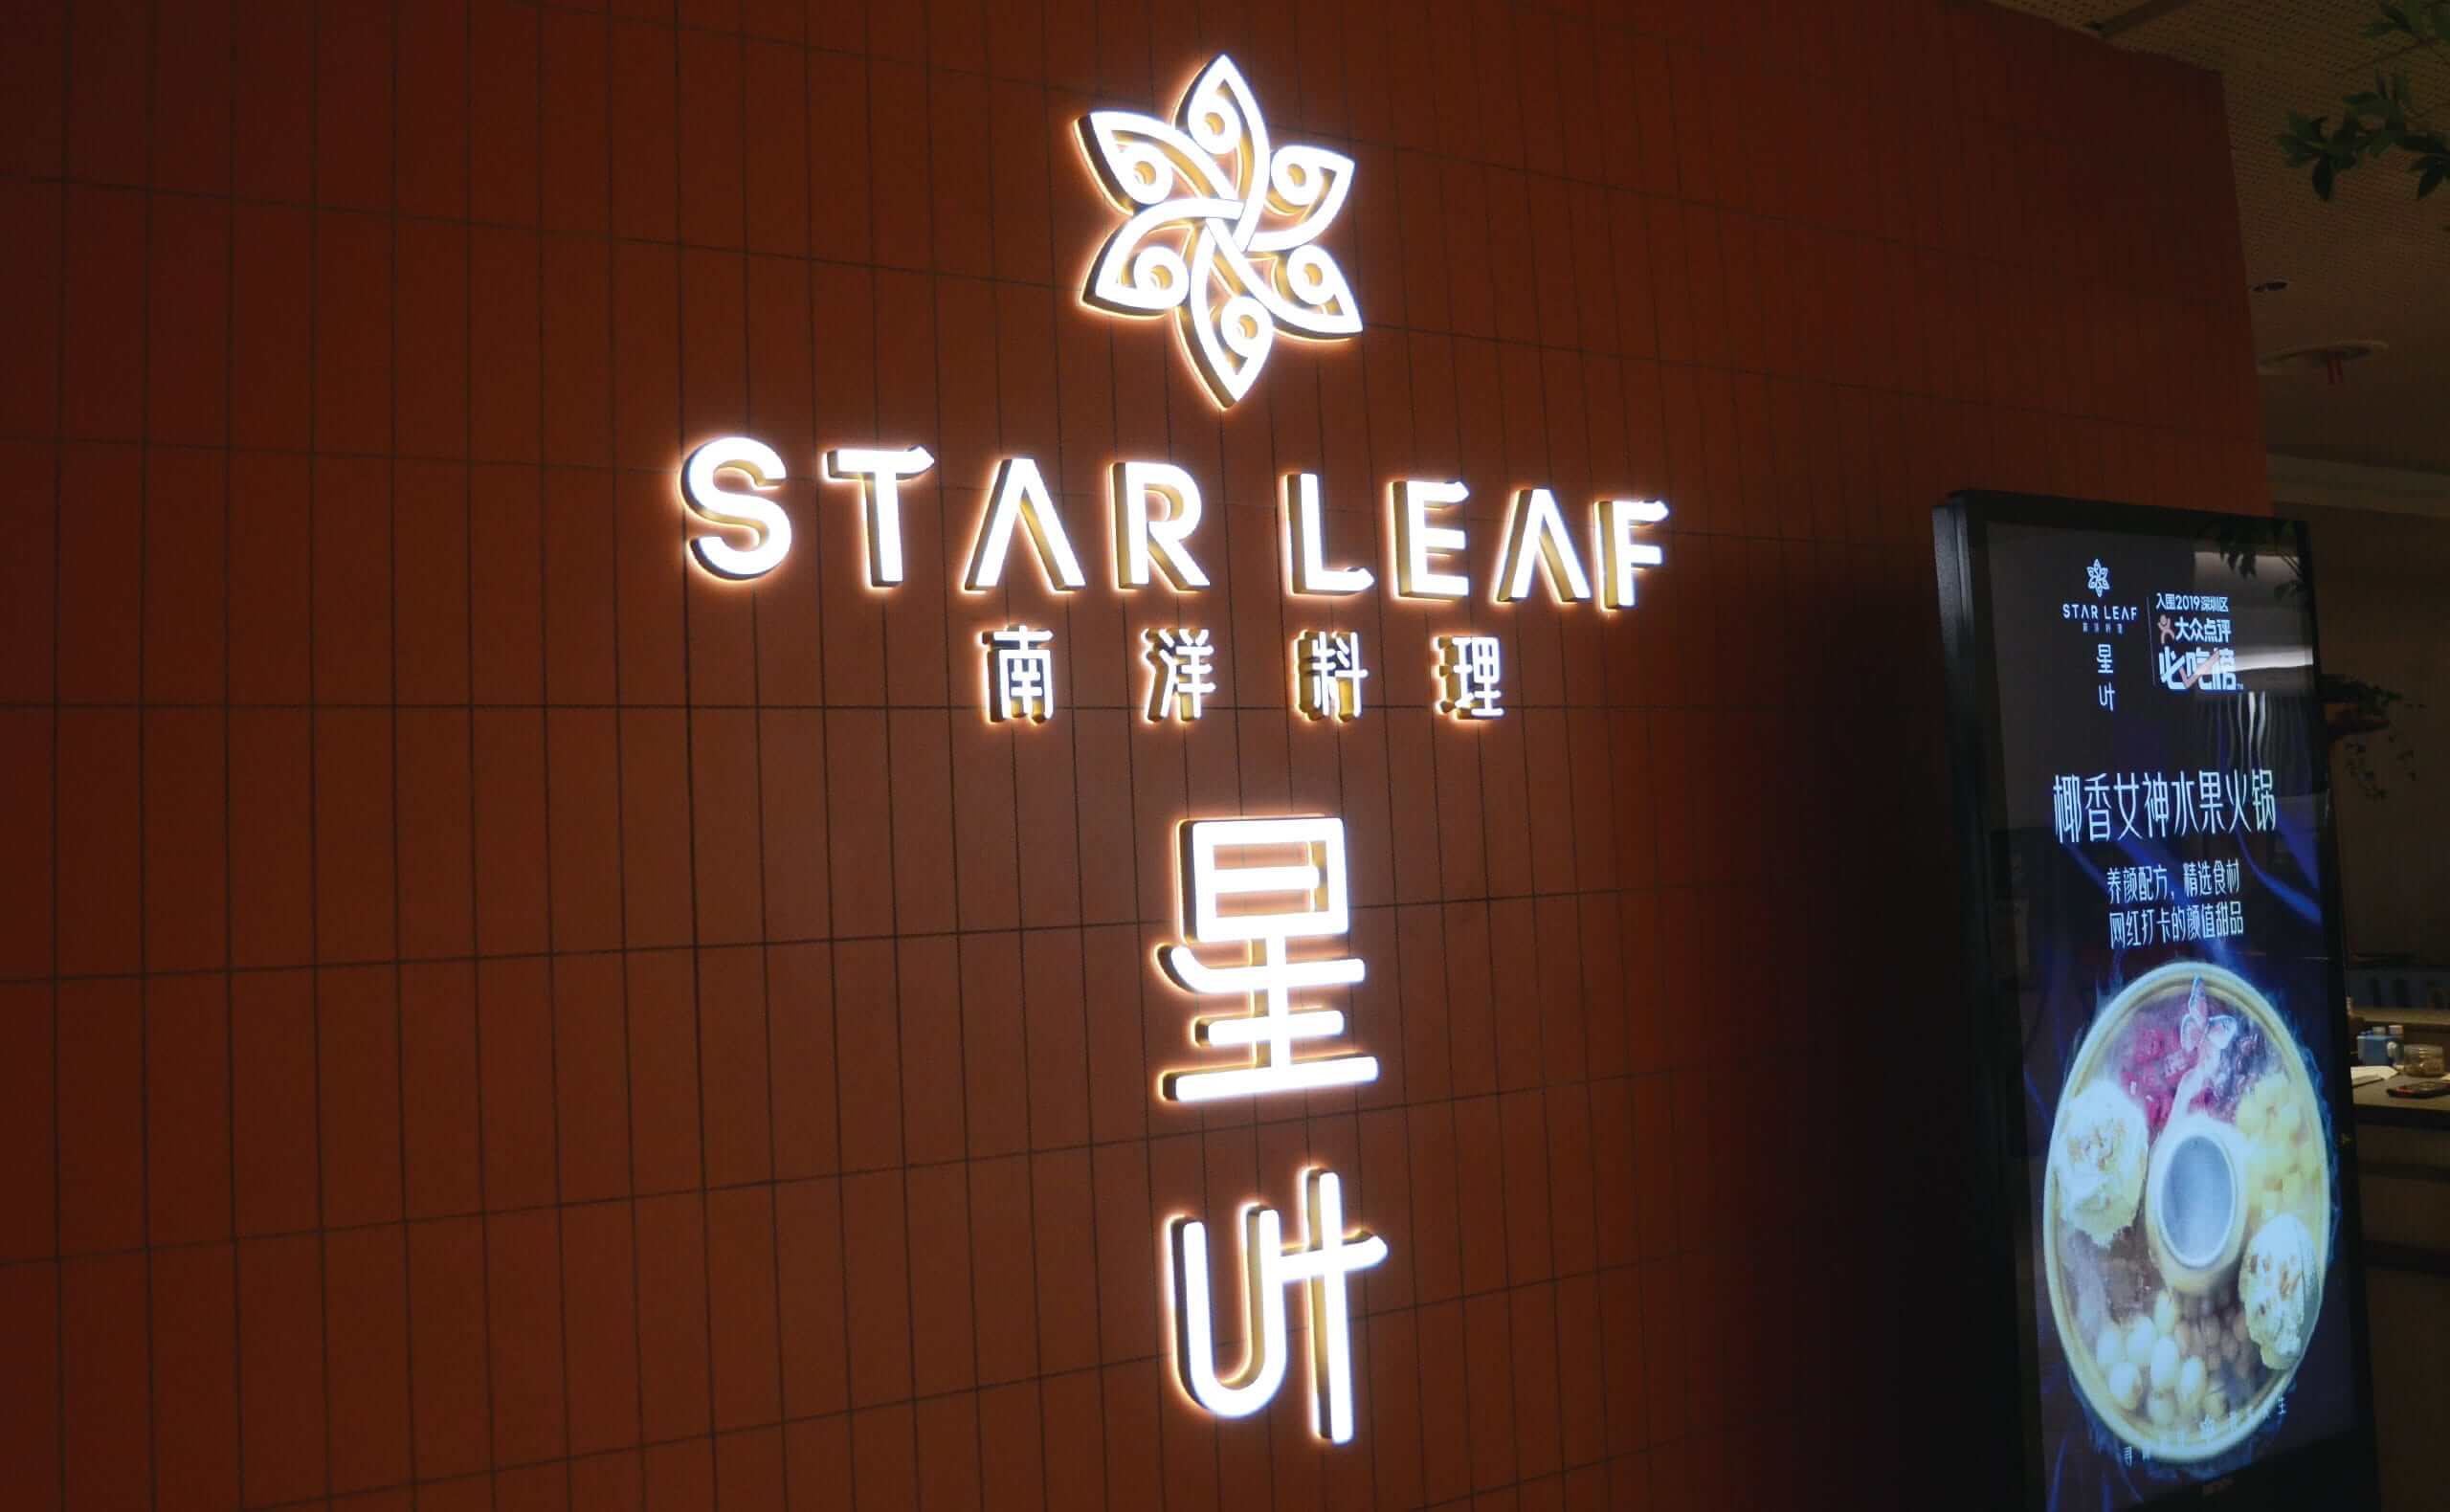 Acrylic Front And Backlit Channel Letters For Star Leaf Restaurant